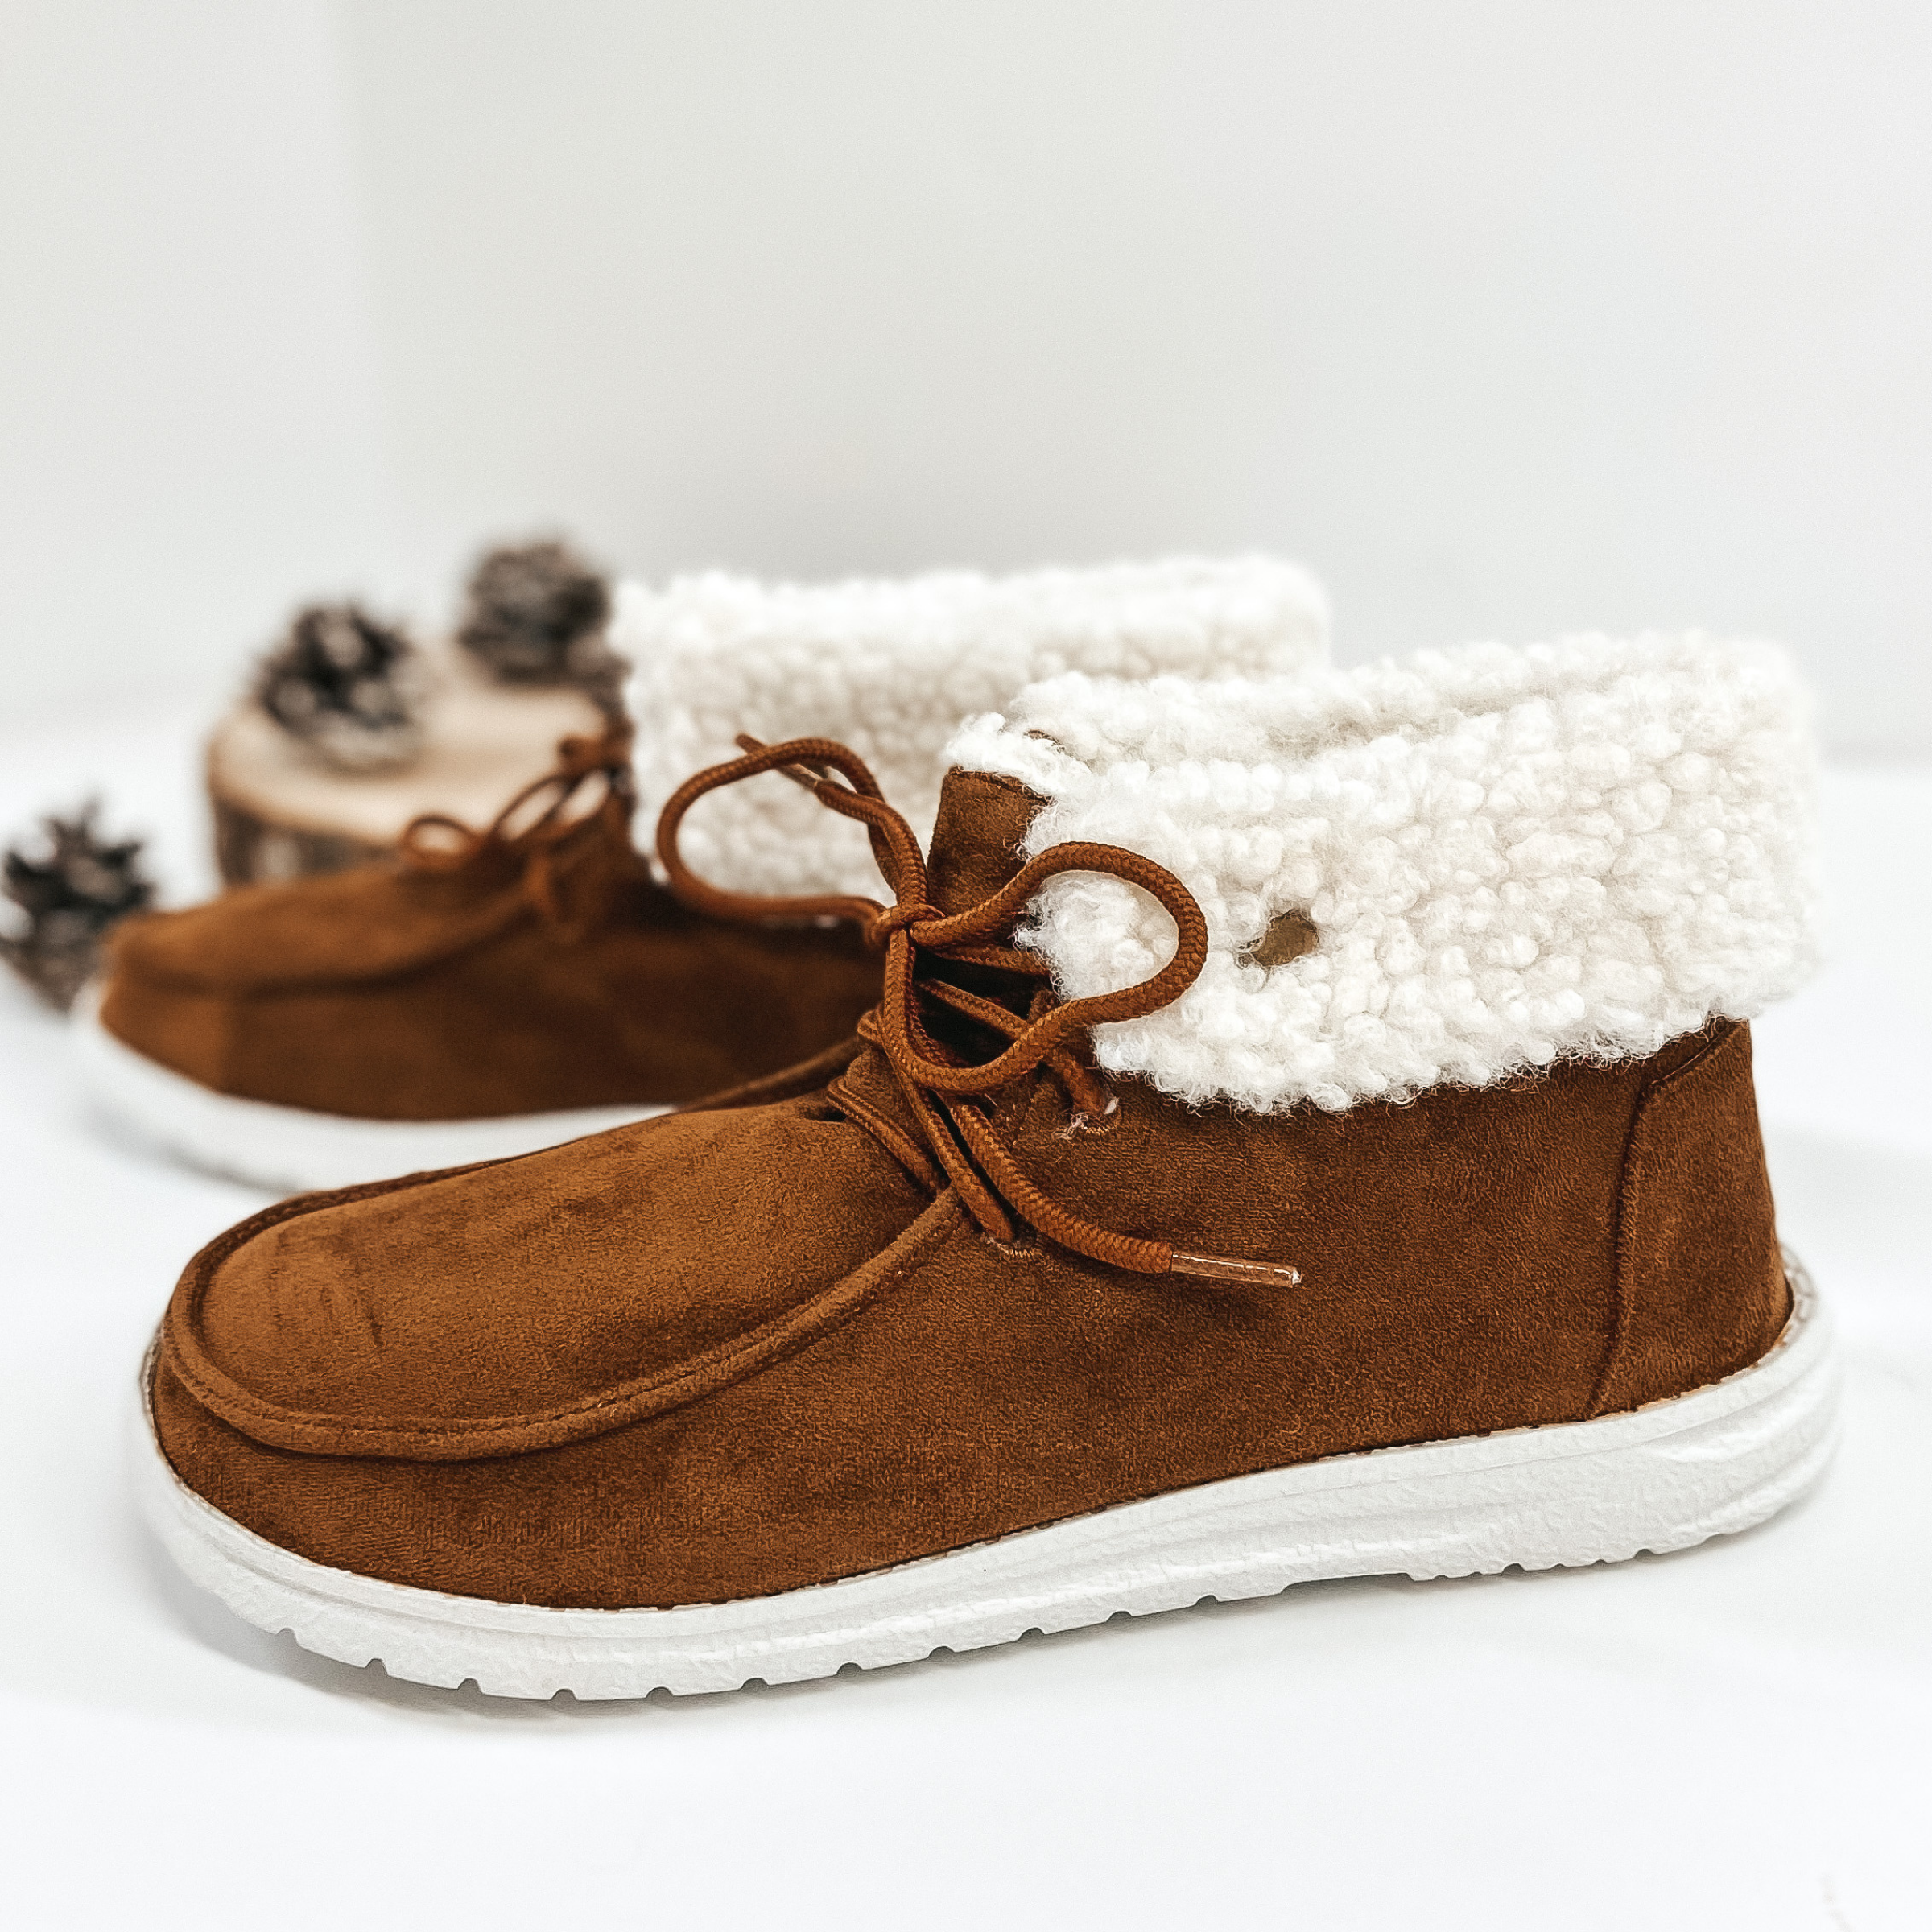 Very G | Have To Run High Top Slip On Loafers with Laces and Sherpa Lining in Tan - Giddy Up Glamour Boutique